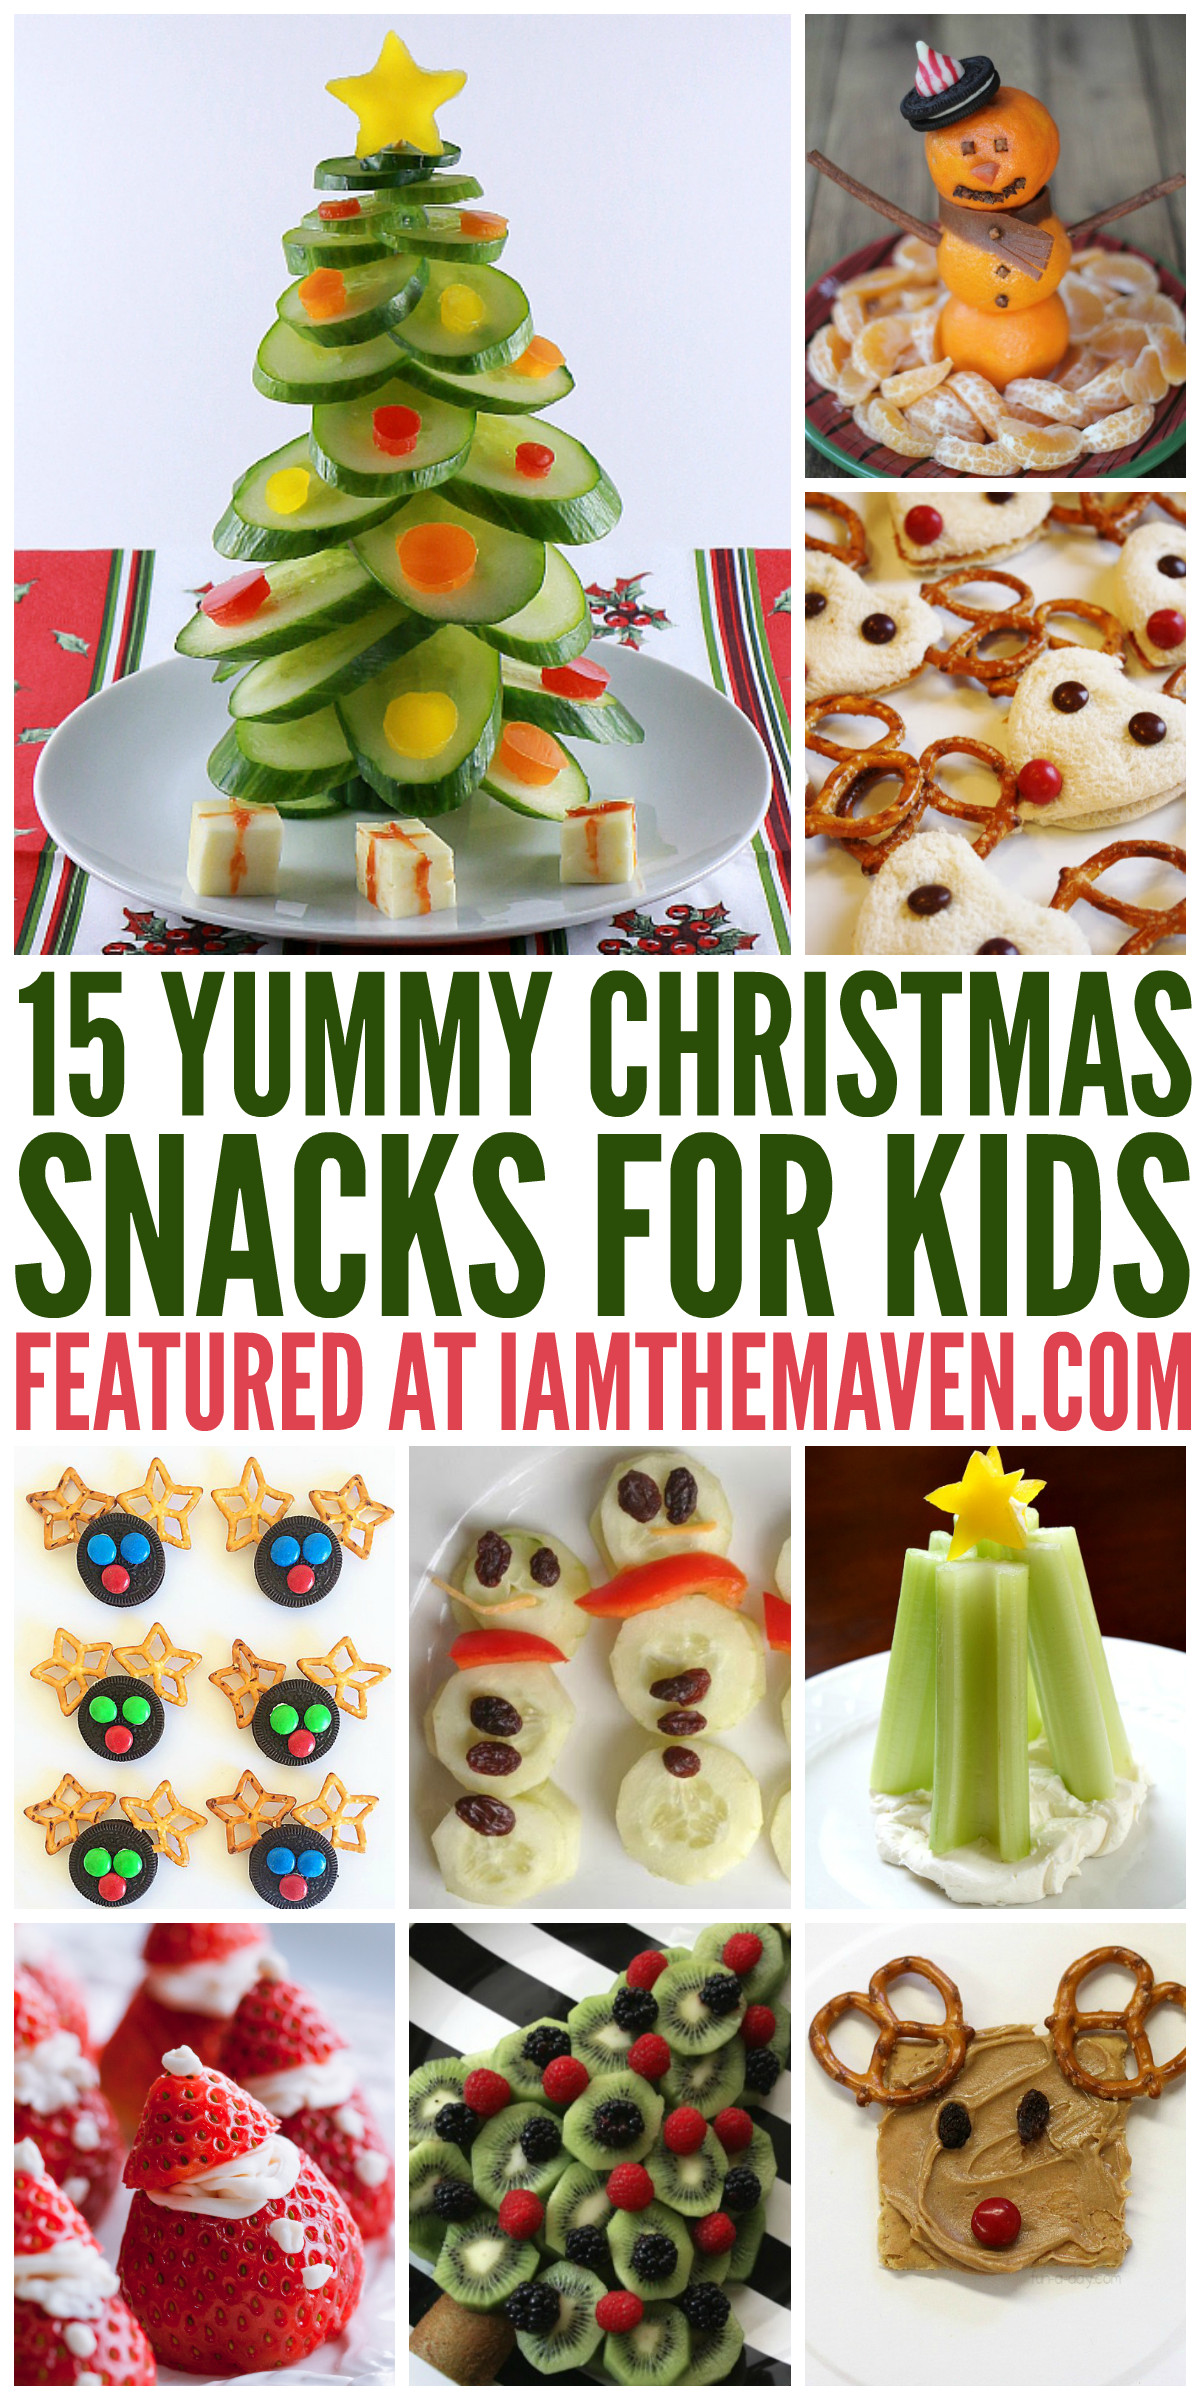 Holiday Party Food Ideas Kids
 15 Yummy Christmas Snacks for Kids